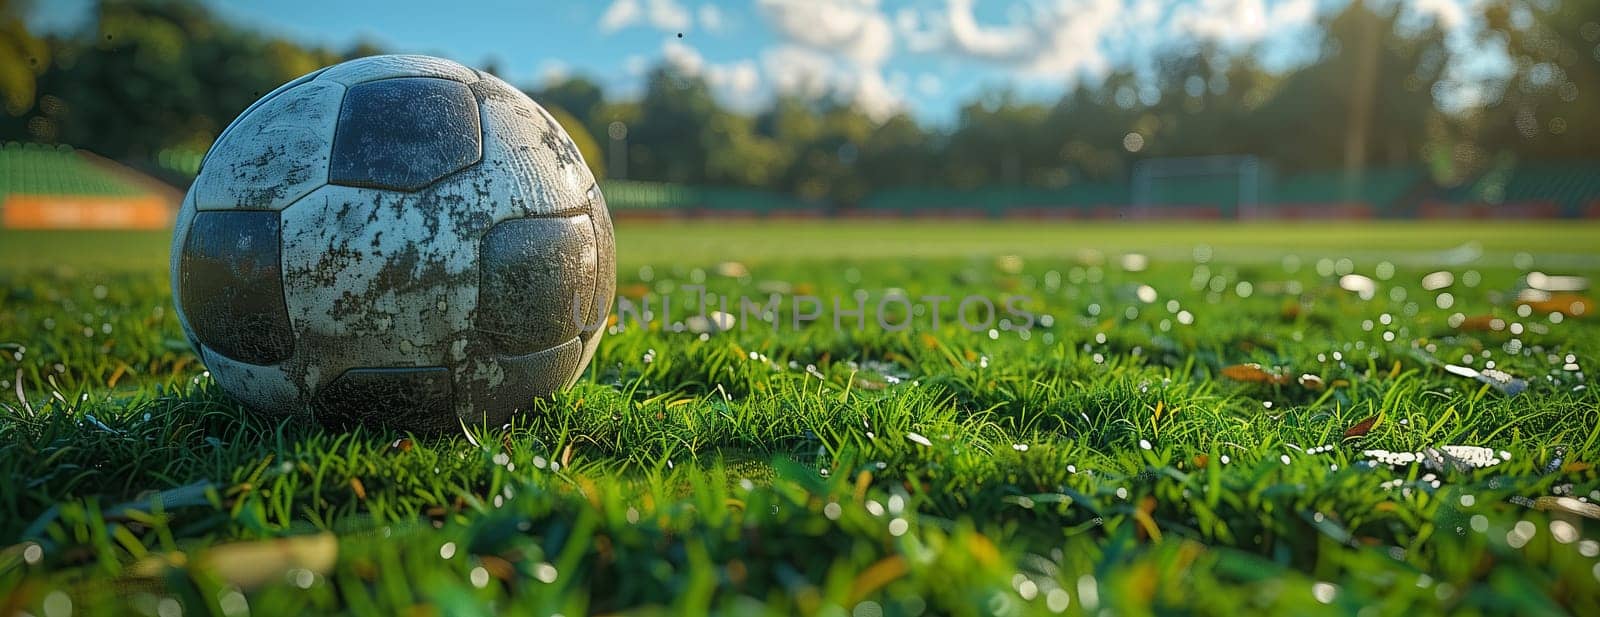 A soccer ball rests on green grass in a natural landscape by richwolf